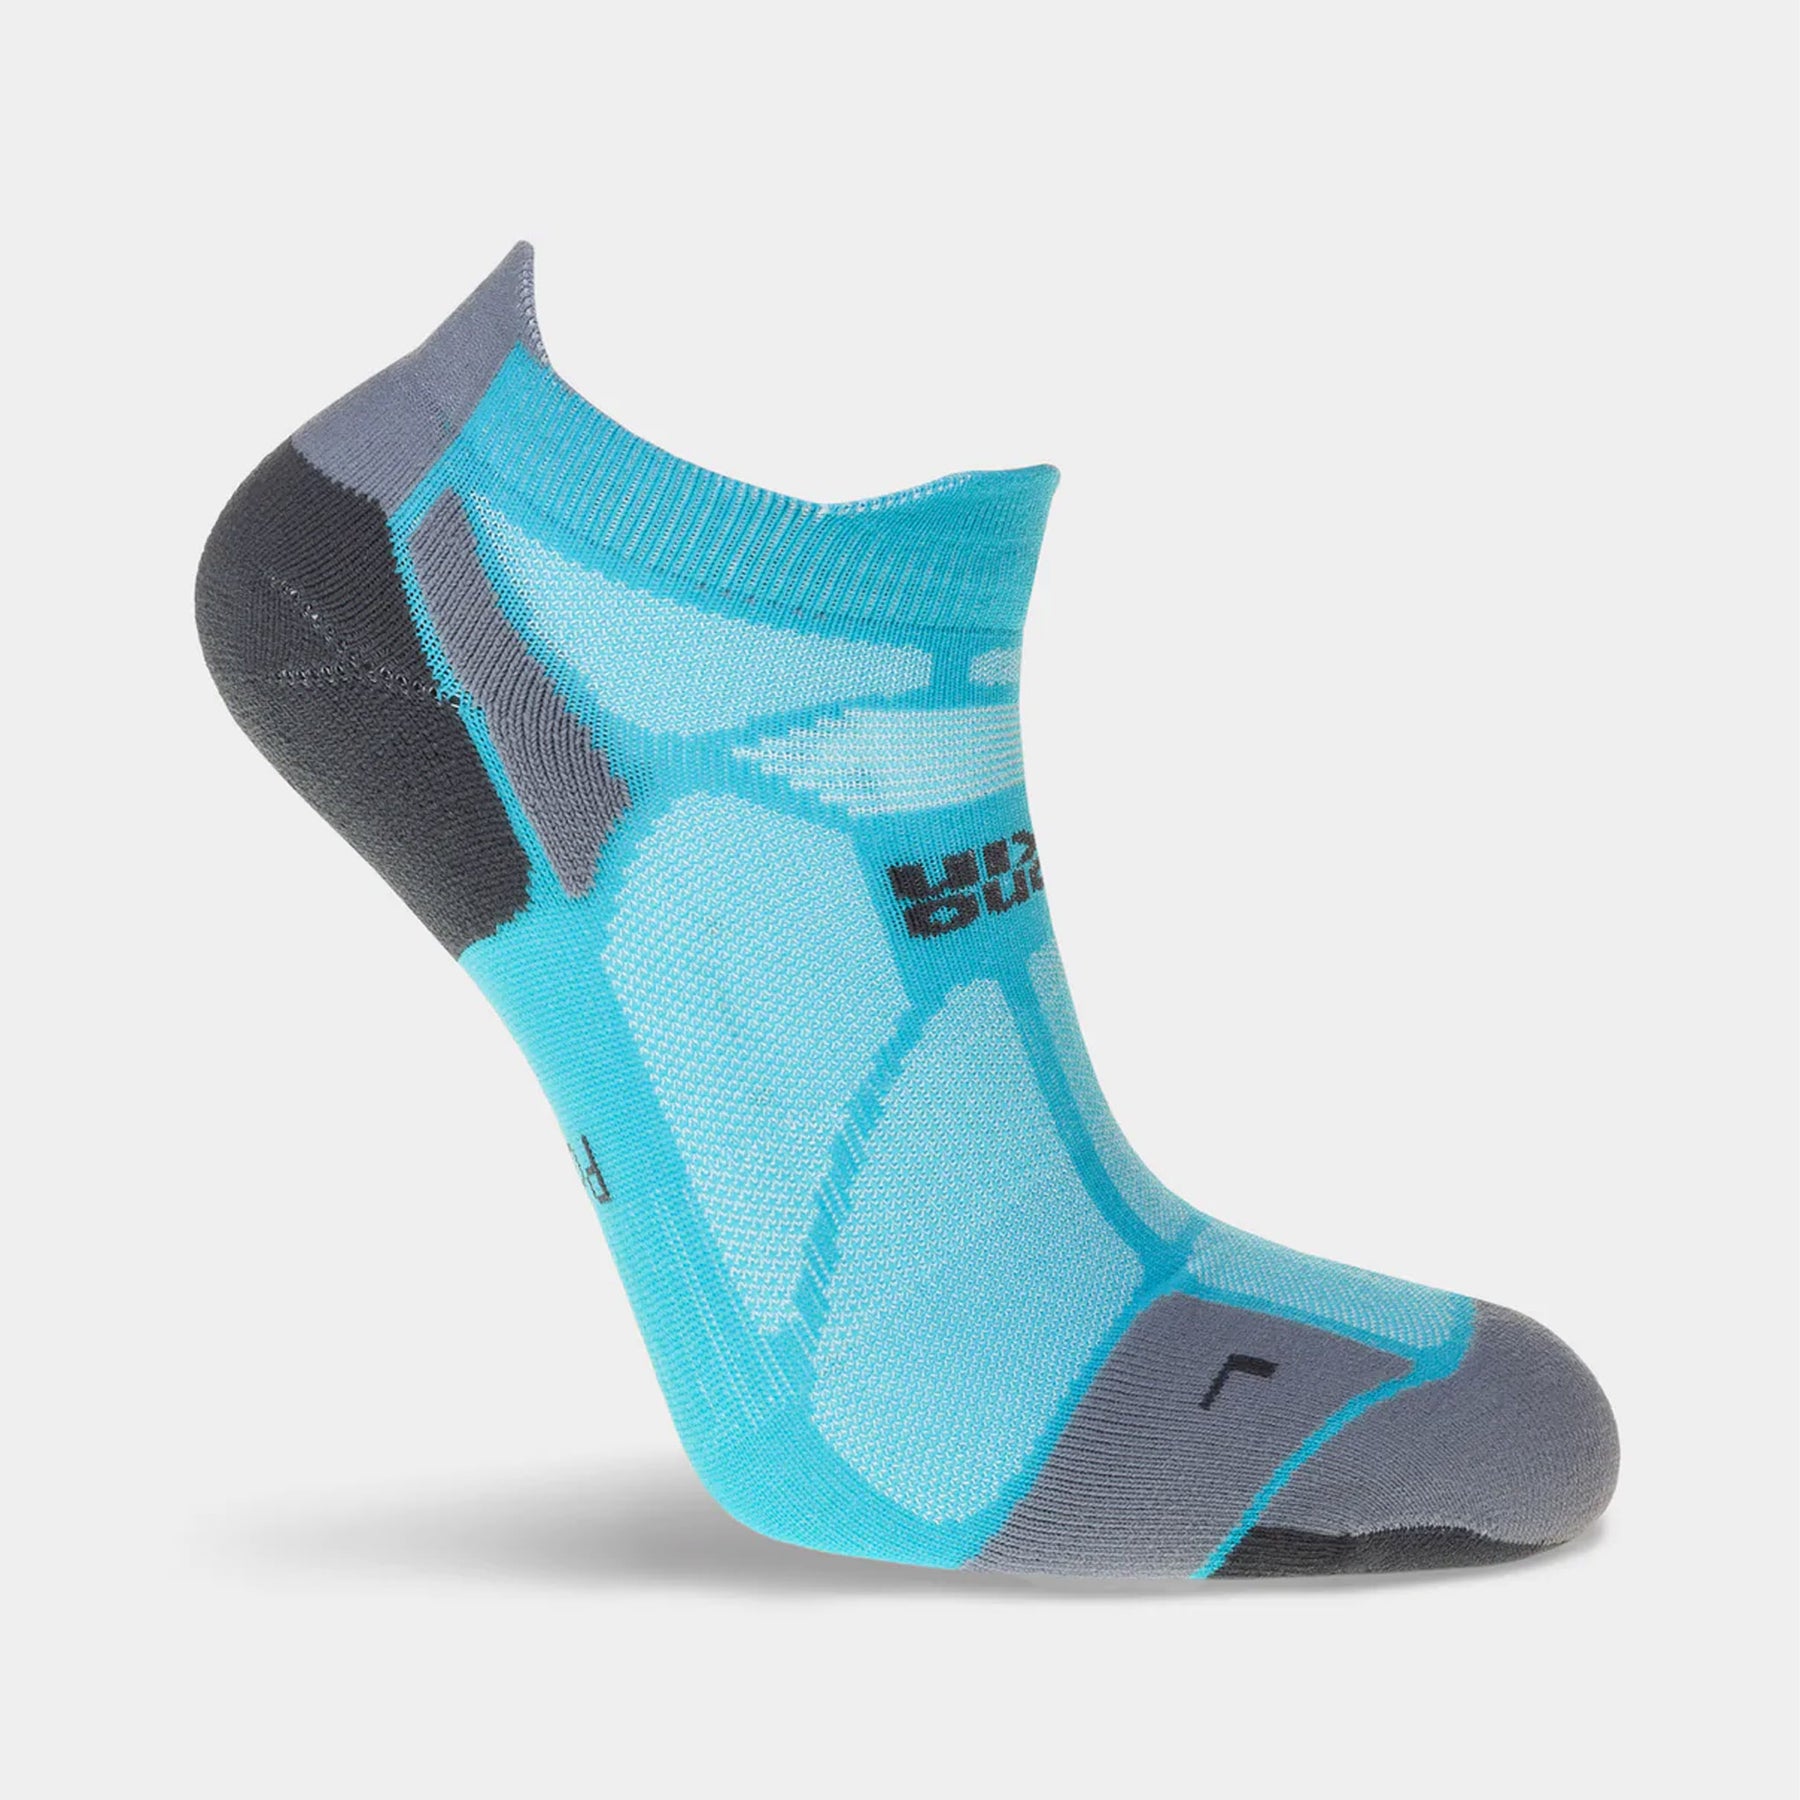 Hilly Womens Marathon Fresh Socklet: Peacock/Charcoal